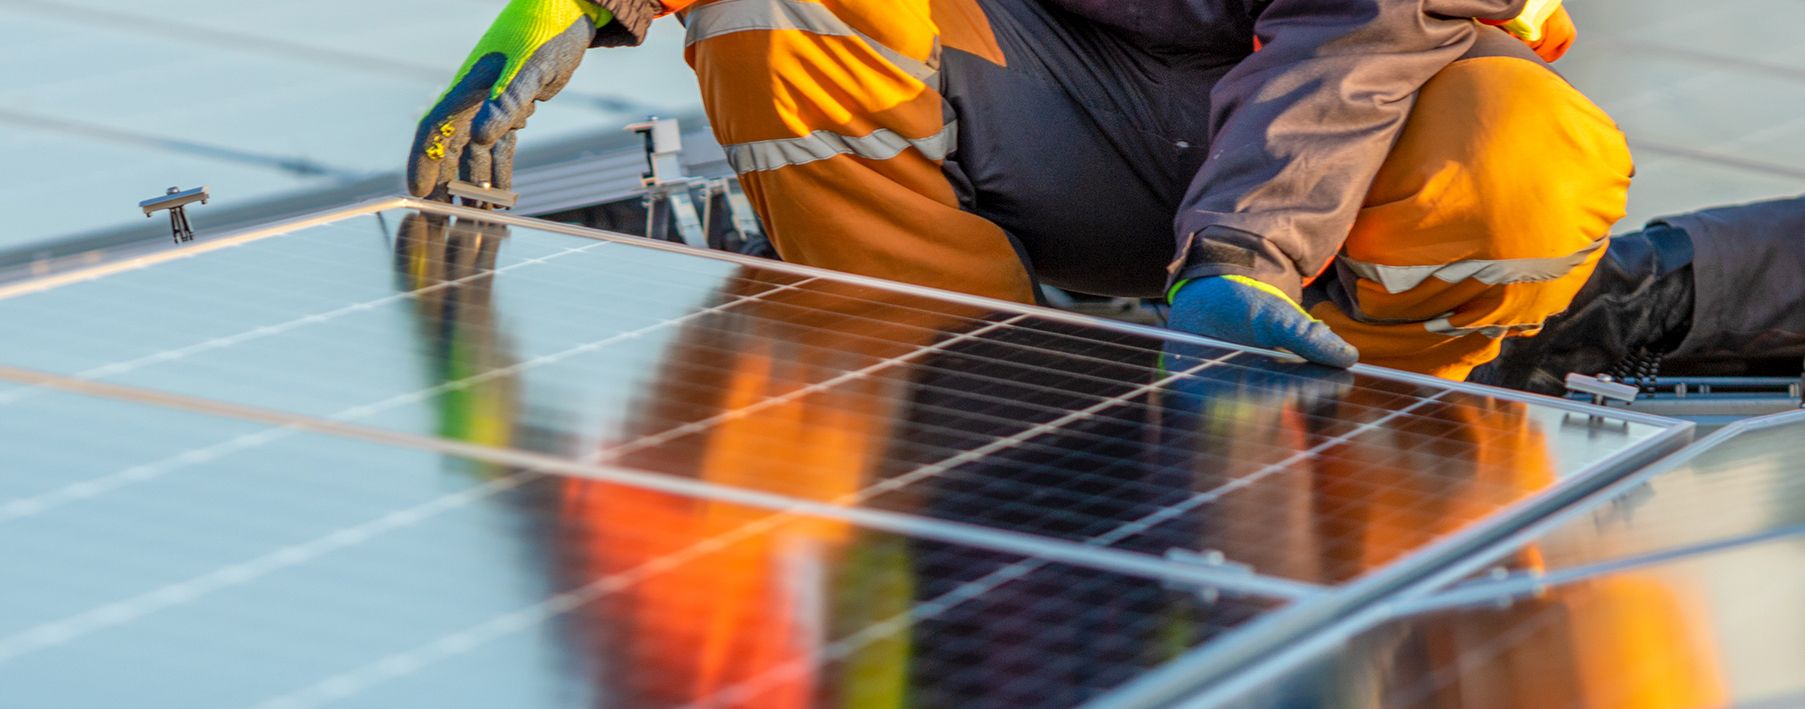 Person in construction gear working on a solar panel on a roof